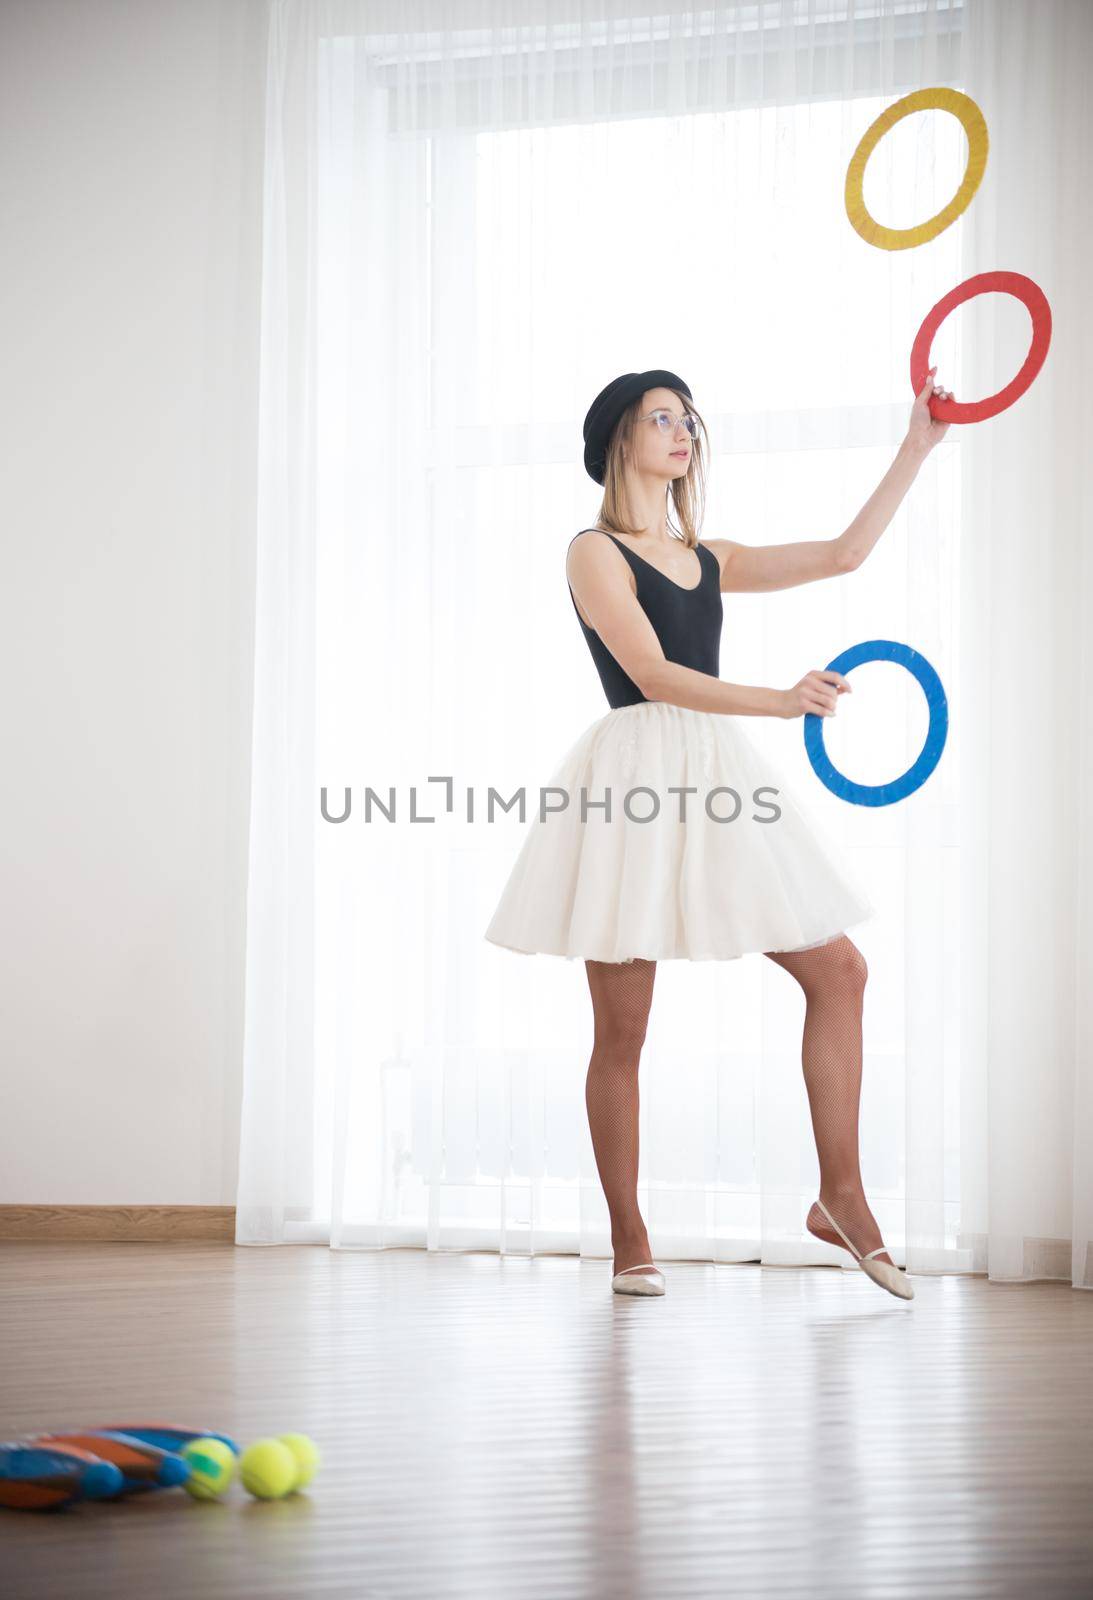 Girl in a hat juggles with rings in the studio, elephoto shot